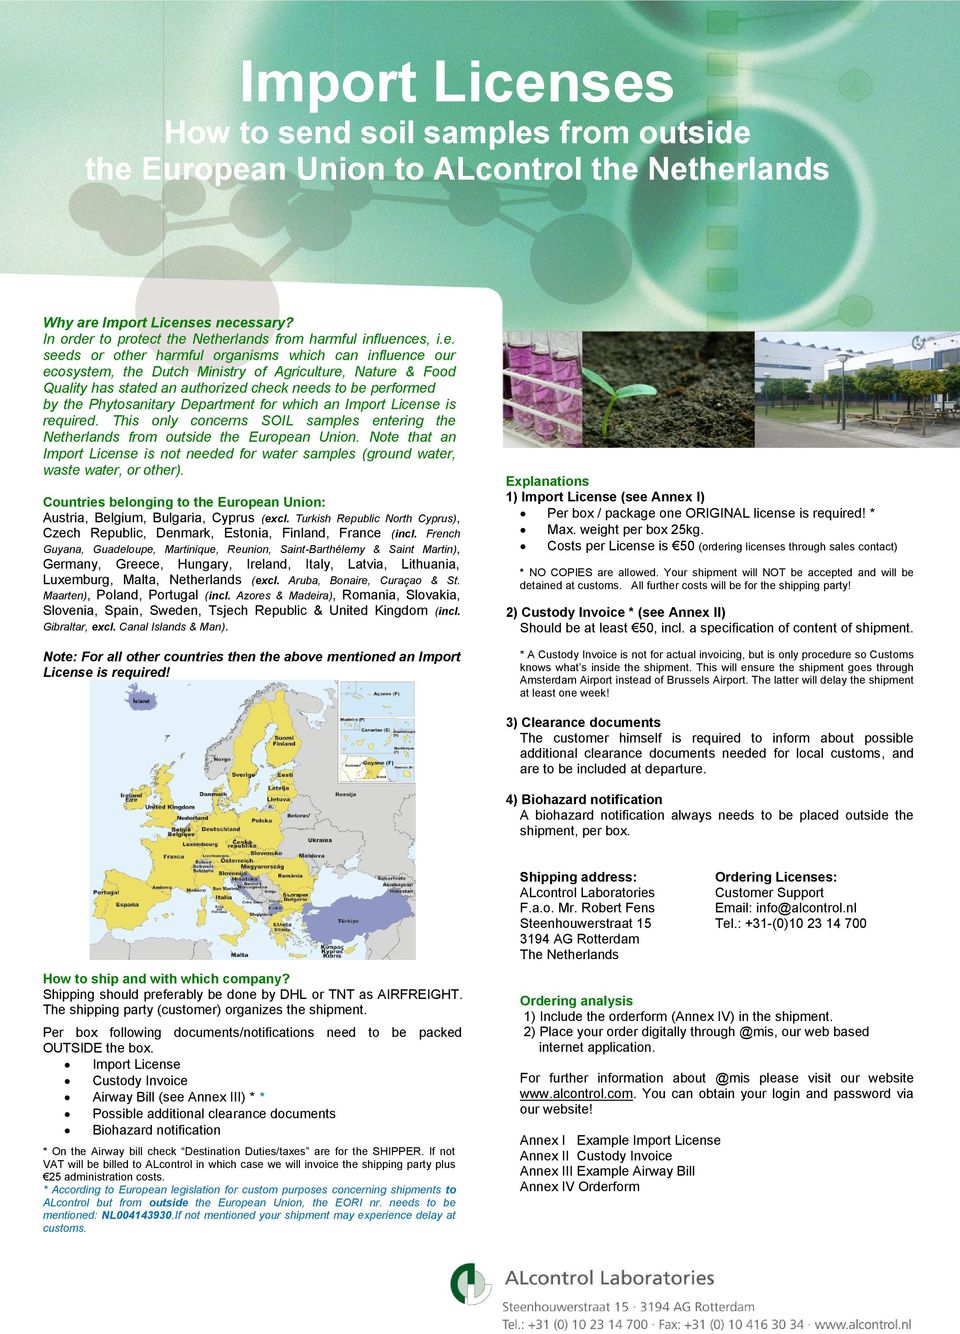 Phytosanitary Department for which an Import License is required. This only concerns SOIL samples entering the Netherlands from outside the European Union.